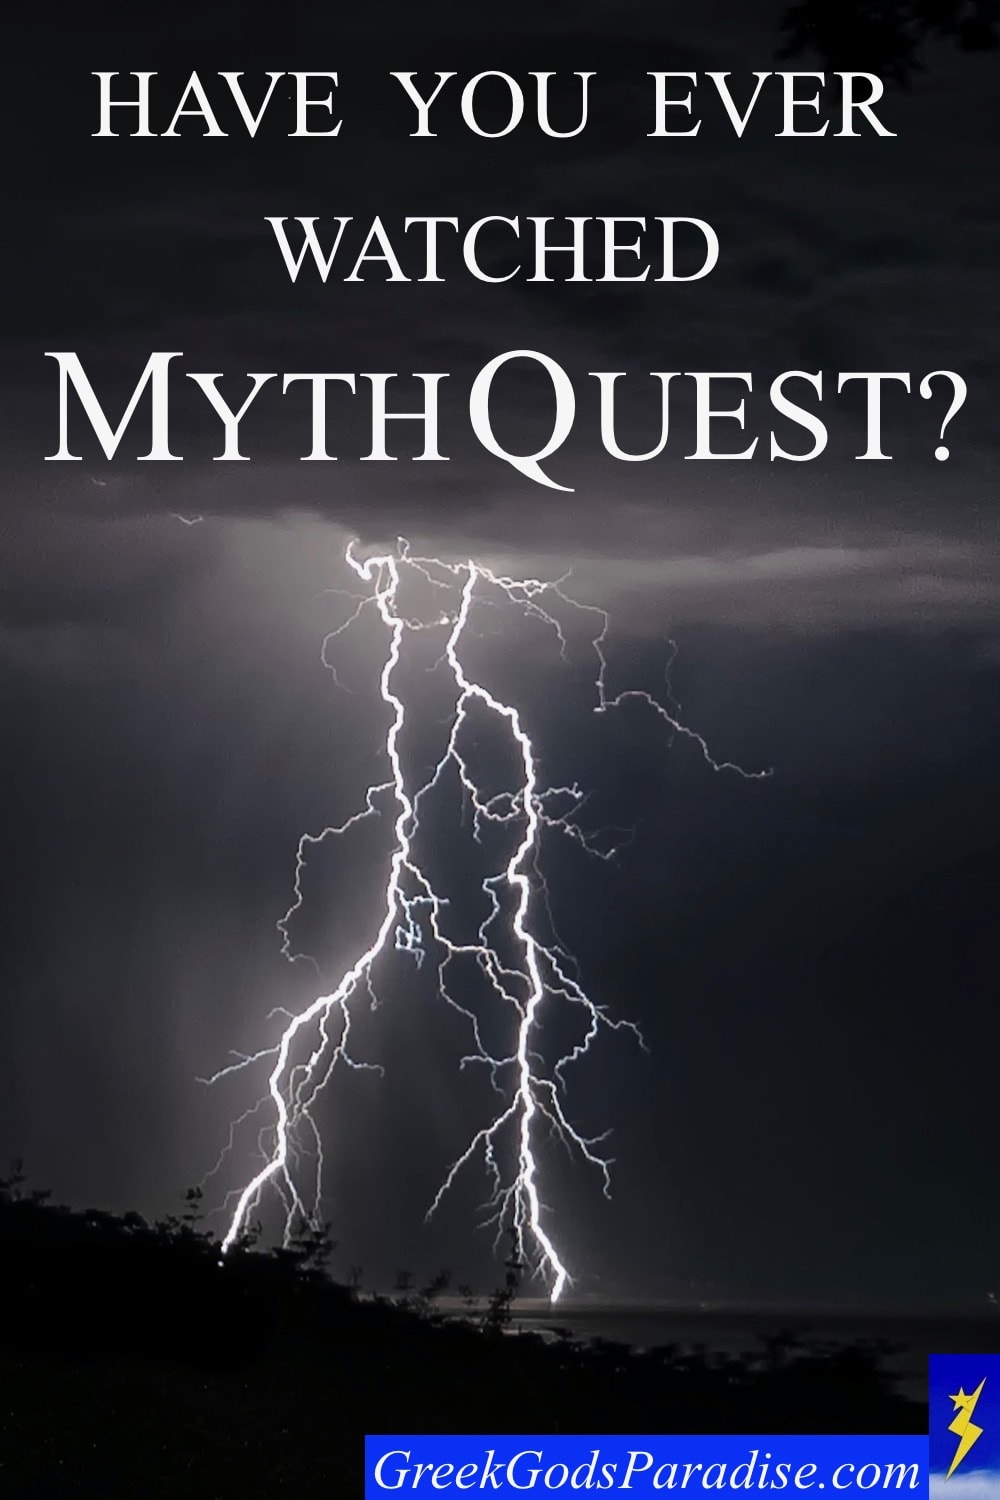 Have You Ever Watched Mythquest